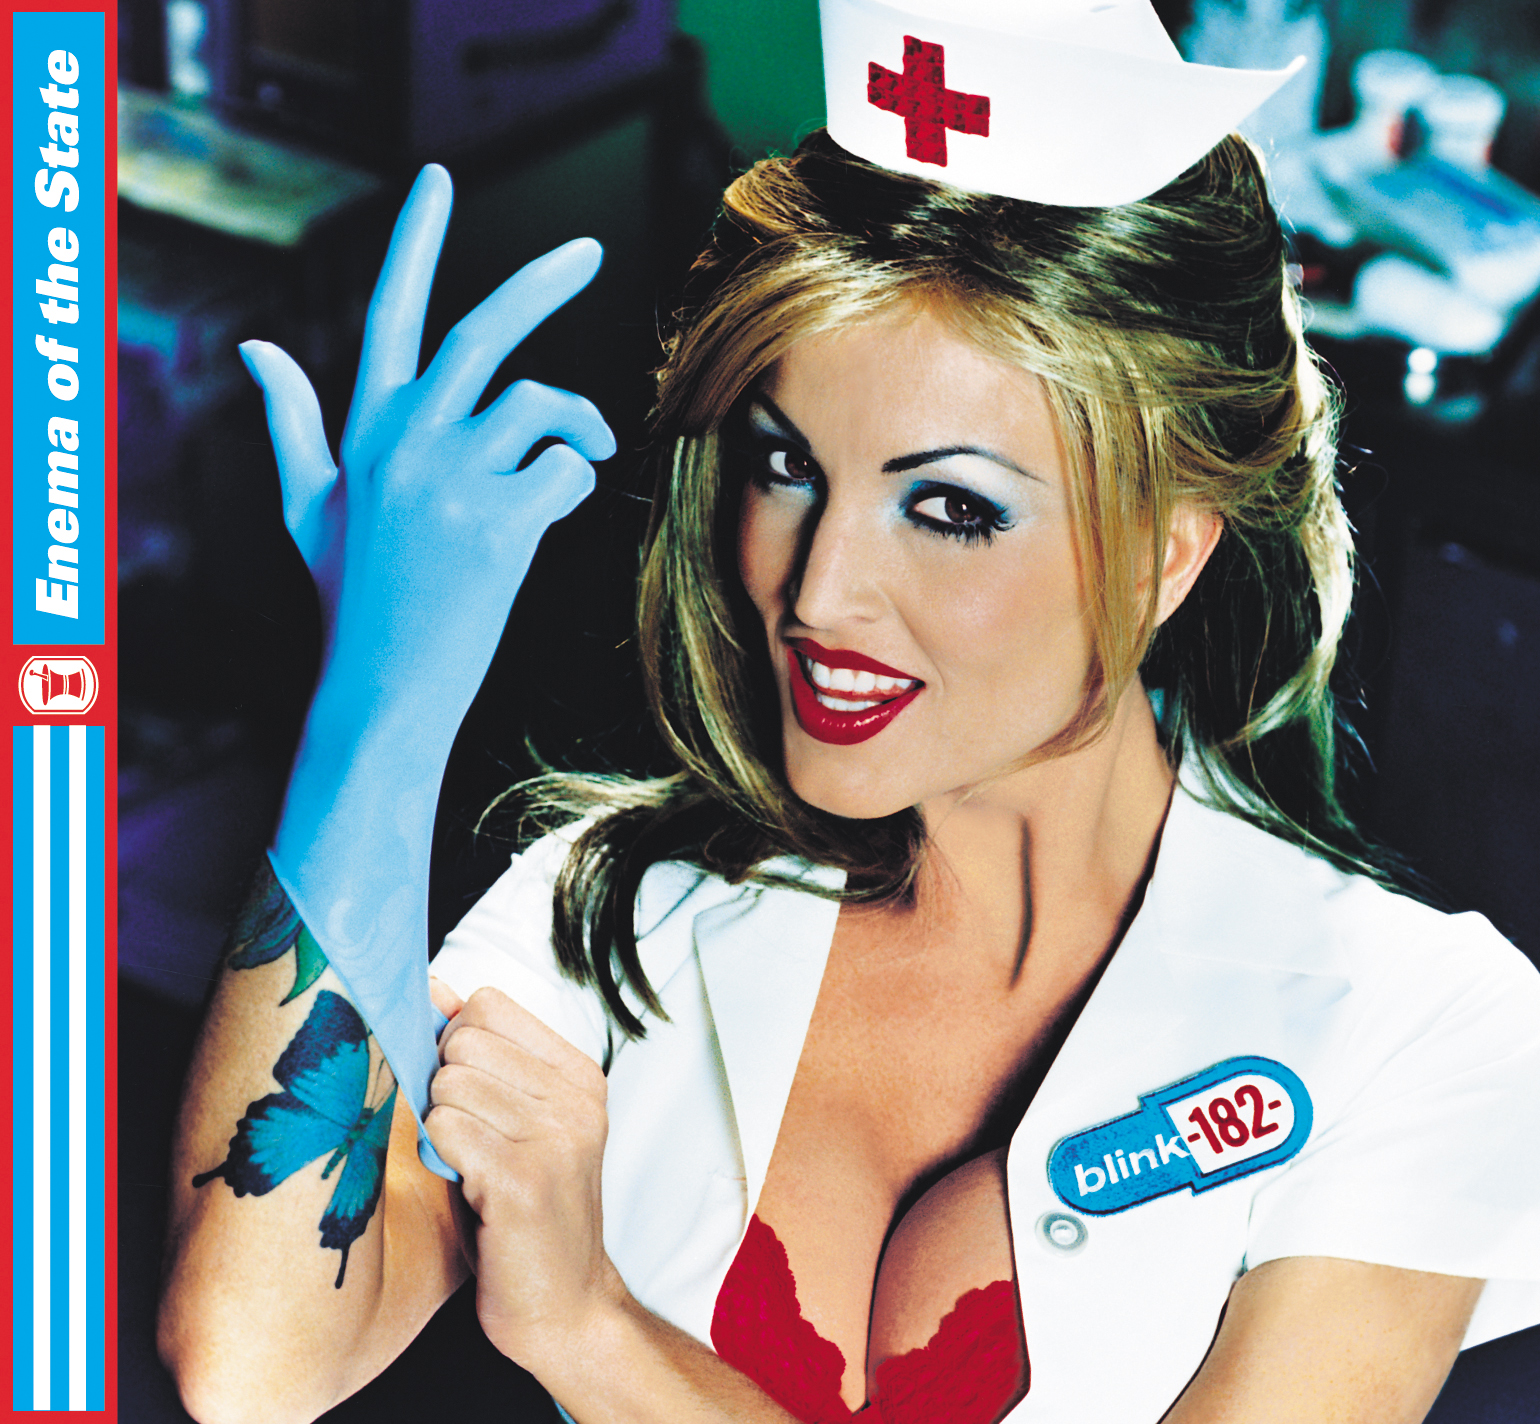 1999: Blink-182, Enema of the State